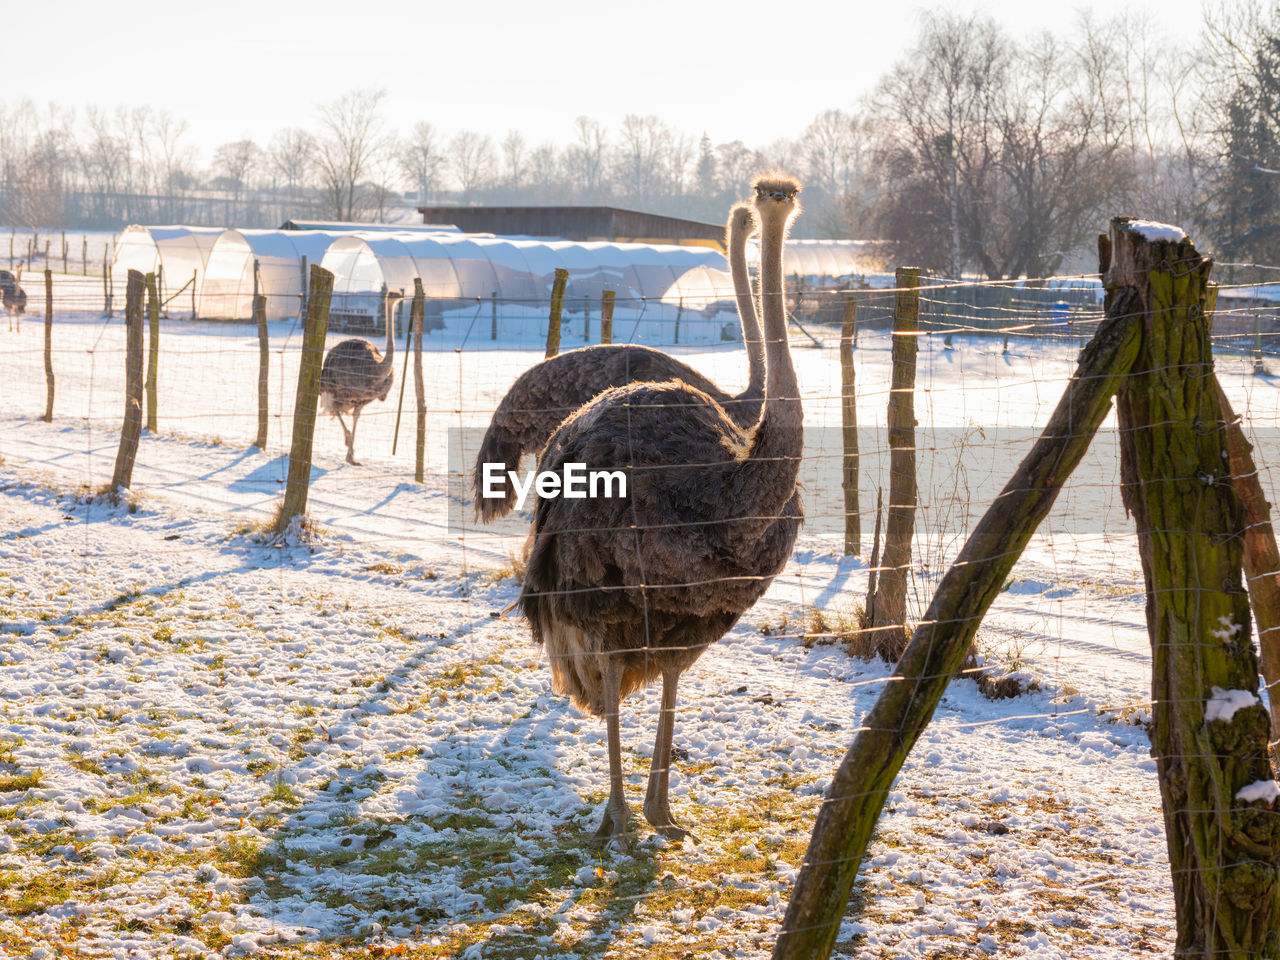 ostrich, nature, bird, animal, animal themes, winter, cold temperature, water, snow, ratite, animal wildlife, day, no people, wildlife, tree, plant, sunlight, sky, fence, outdoors, land, beauty in nature, environment, lake, landscape, scenics - nature